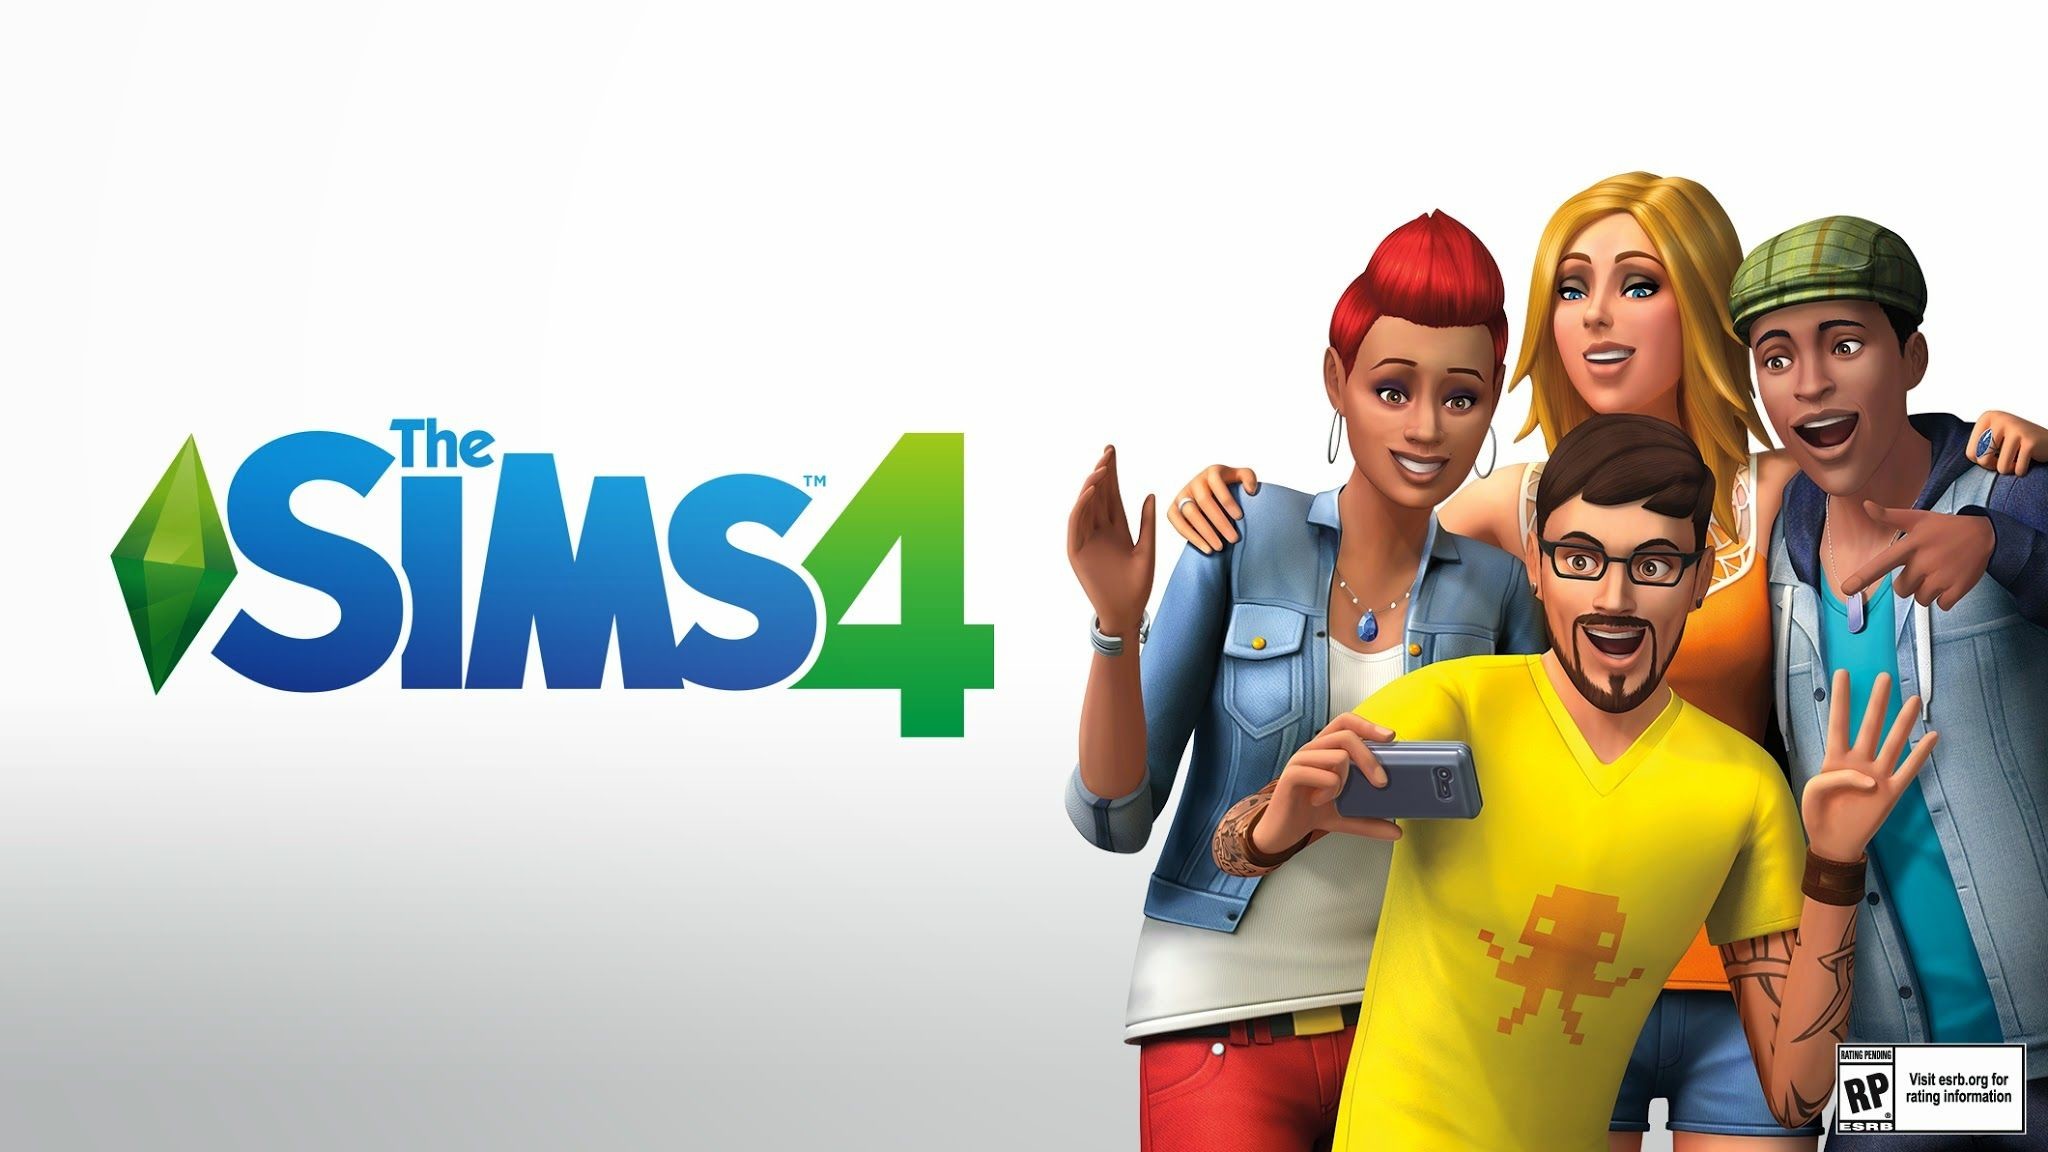 2048x1152 ... The Sims 4 HD Wallpapers ...